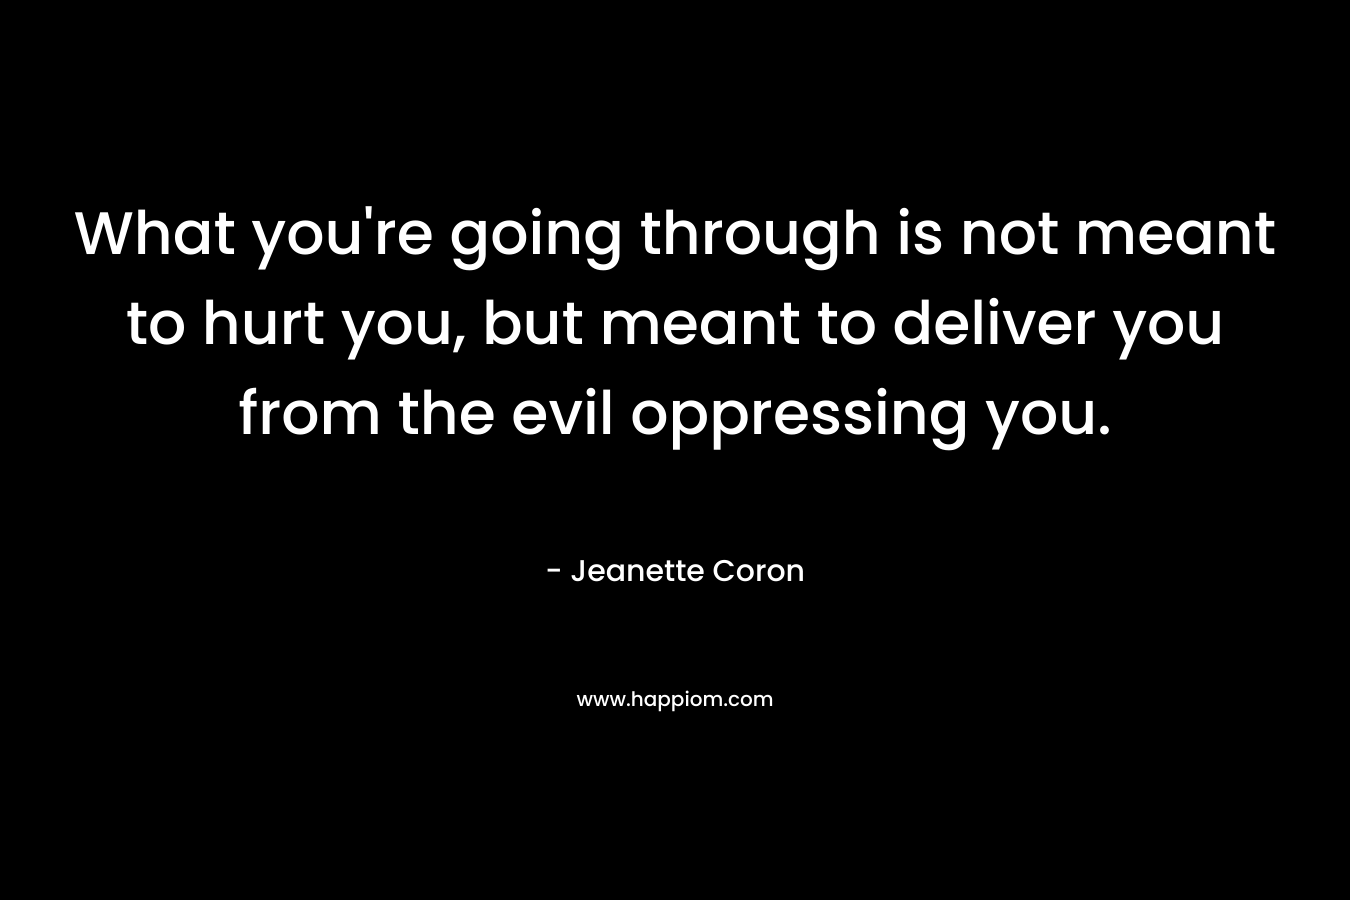 What you're going through is not meant to hurt you, but meant to deliver you from the evil oppressing you.